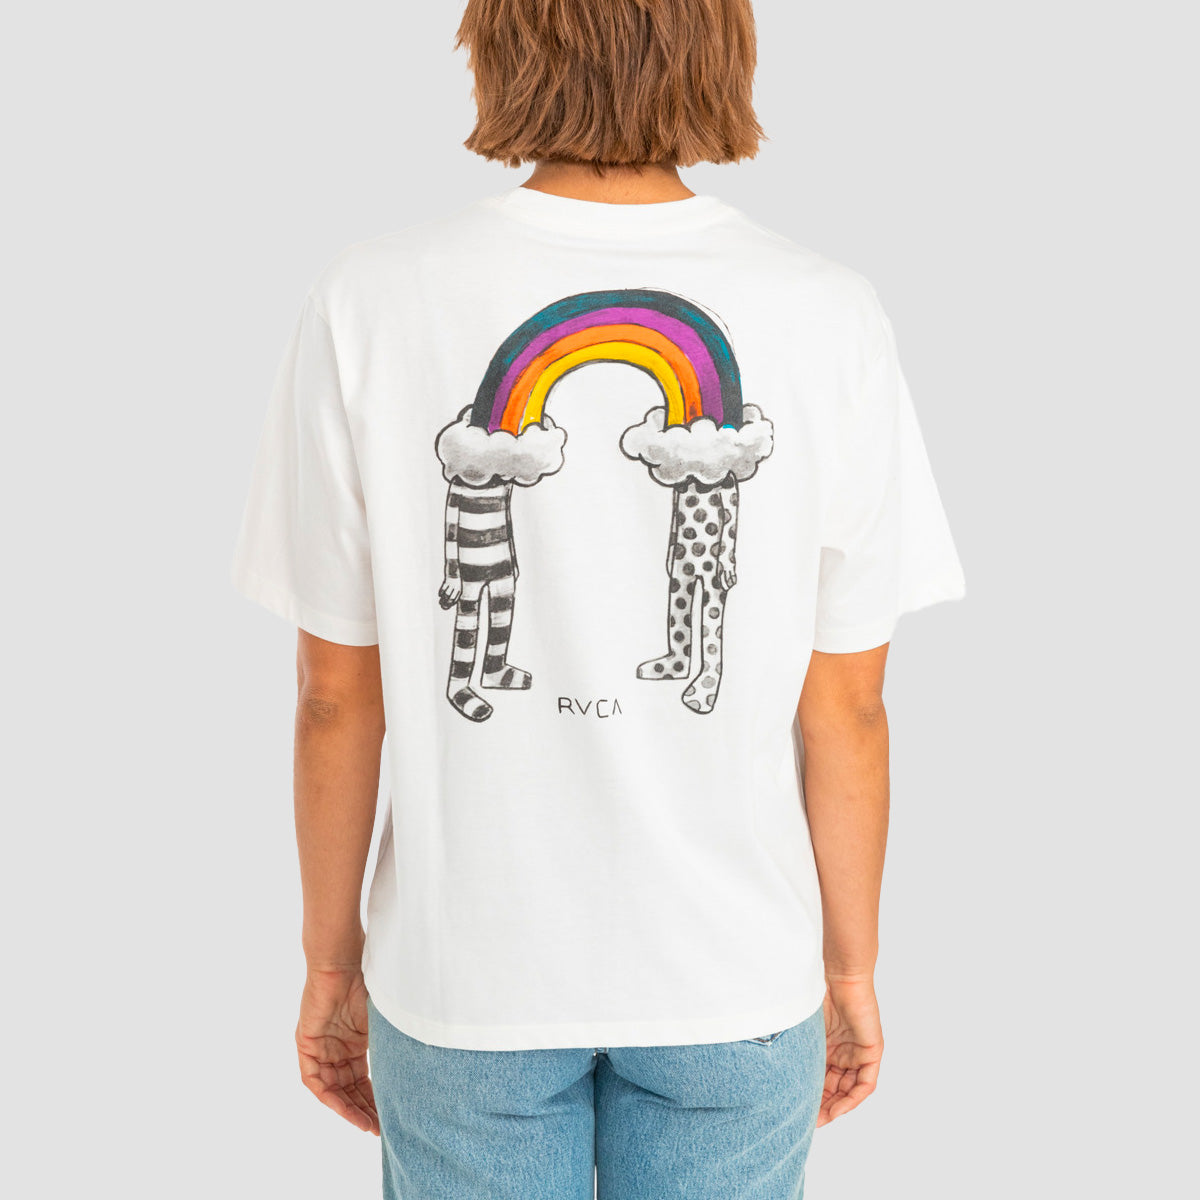 RVCA Andrew Pommier Rainbow Connection T-Shirt Vintage White - Womens